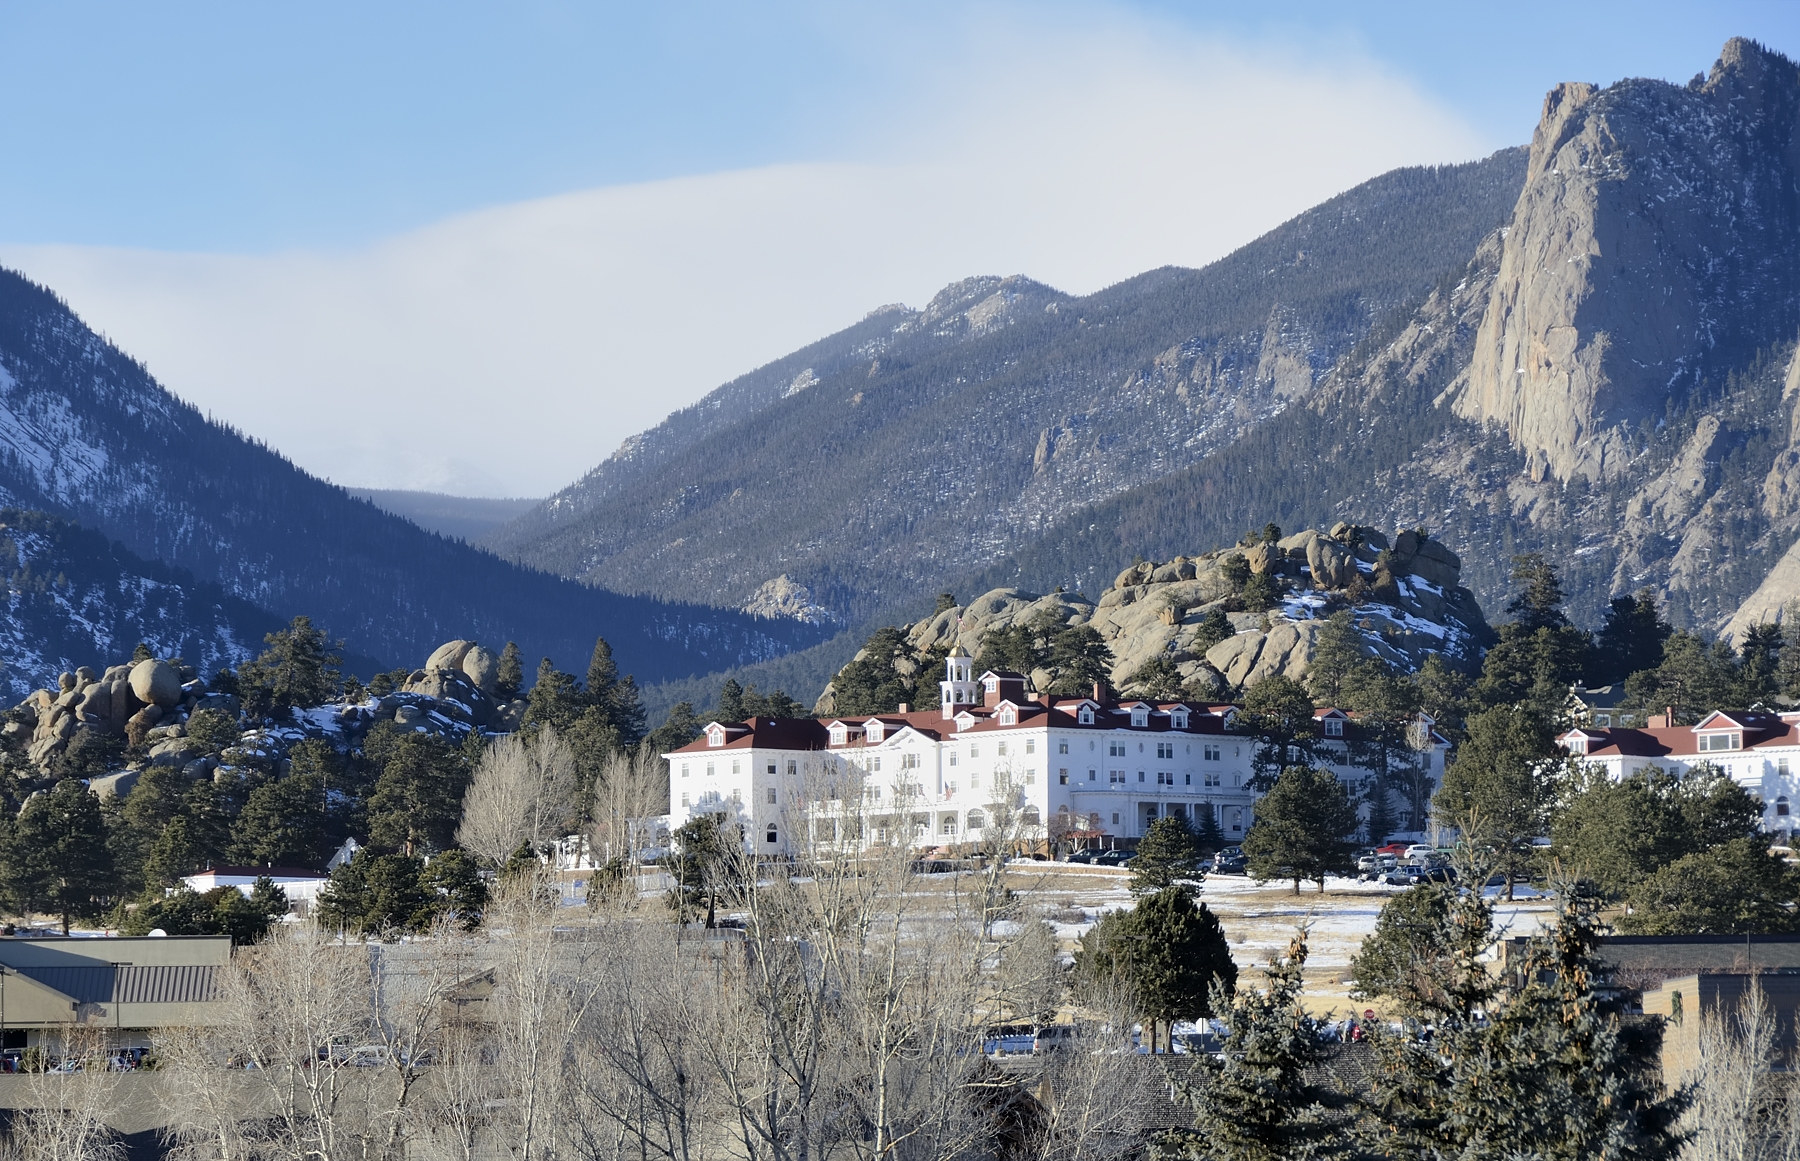 The famous Stanley hotel in beautiful Estes Park in the Rocky Mountains of Colorado.